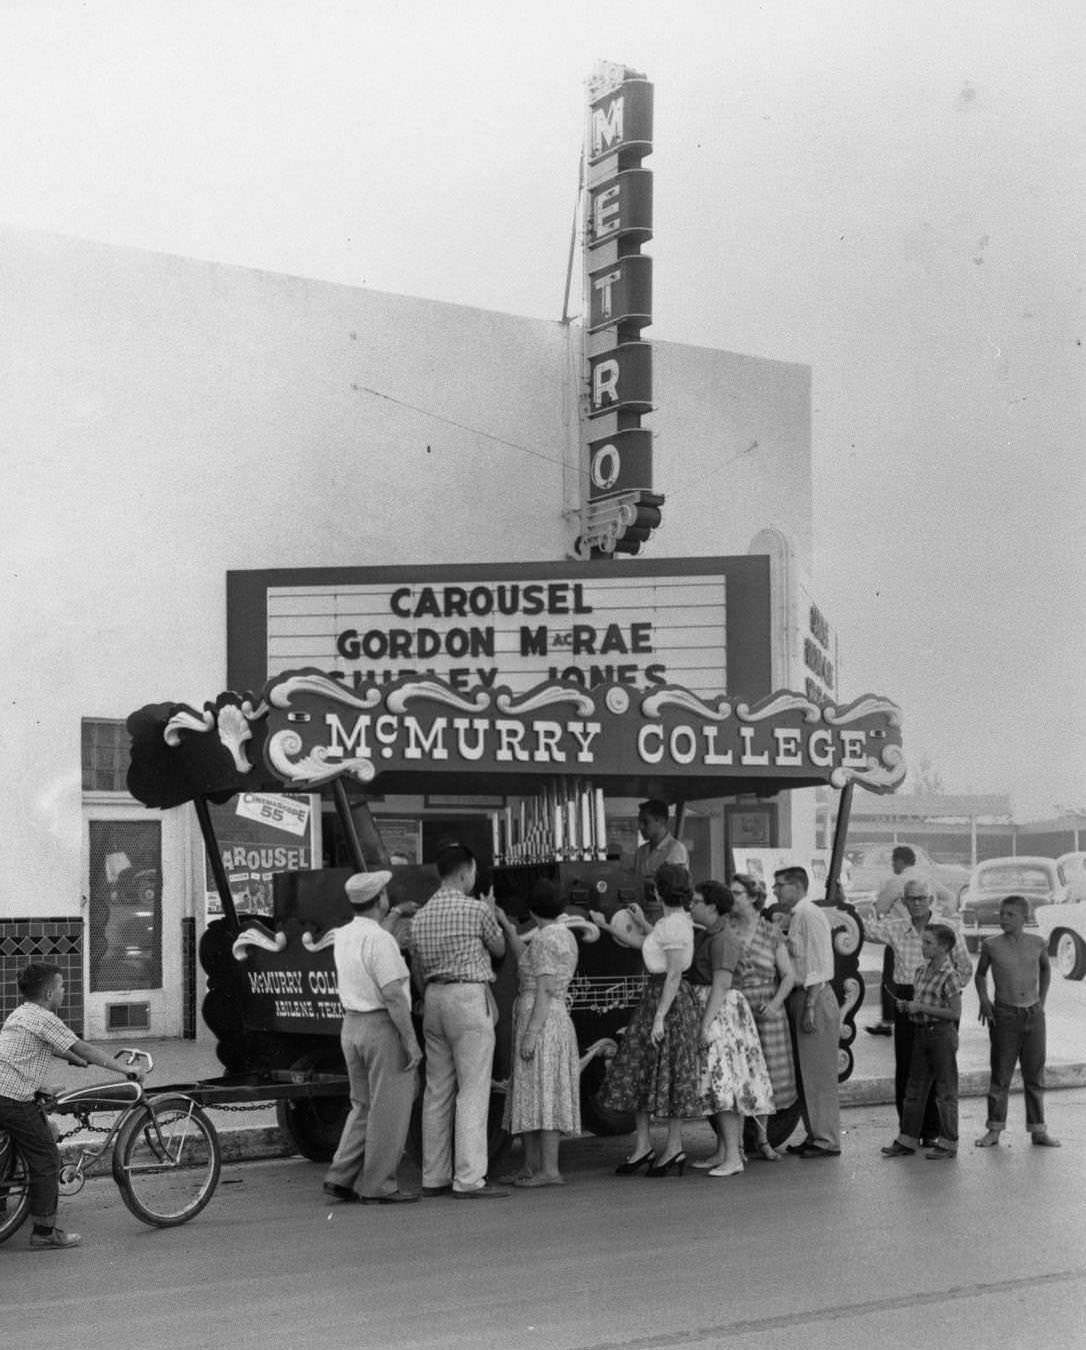 The McMurry College calliope on the street in front of the Metro Theater in Abilene with a group of people standing around it in the mid 1950's.